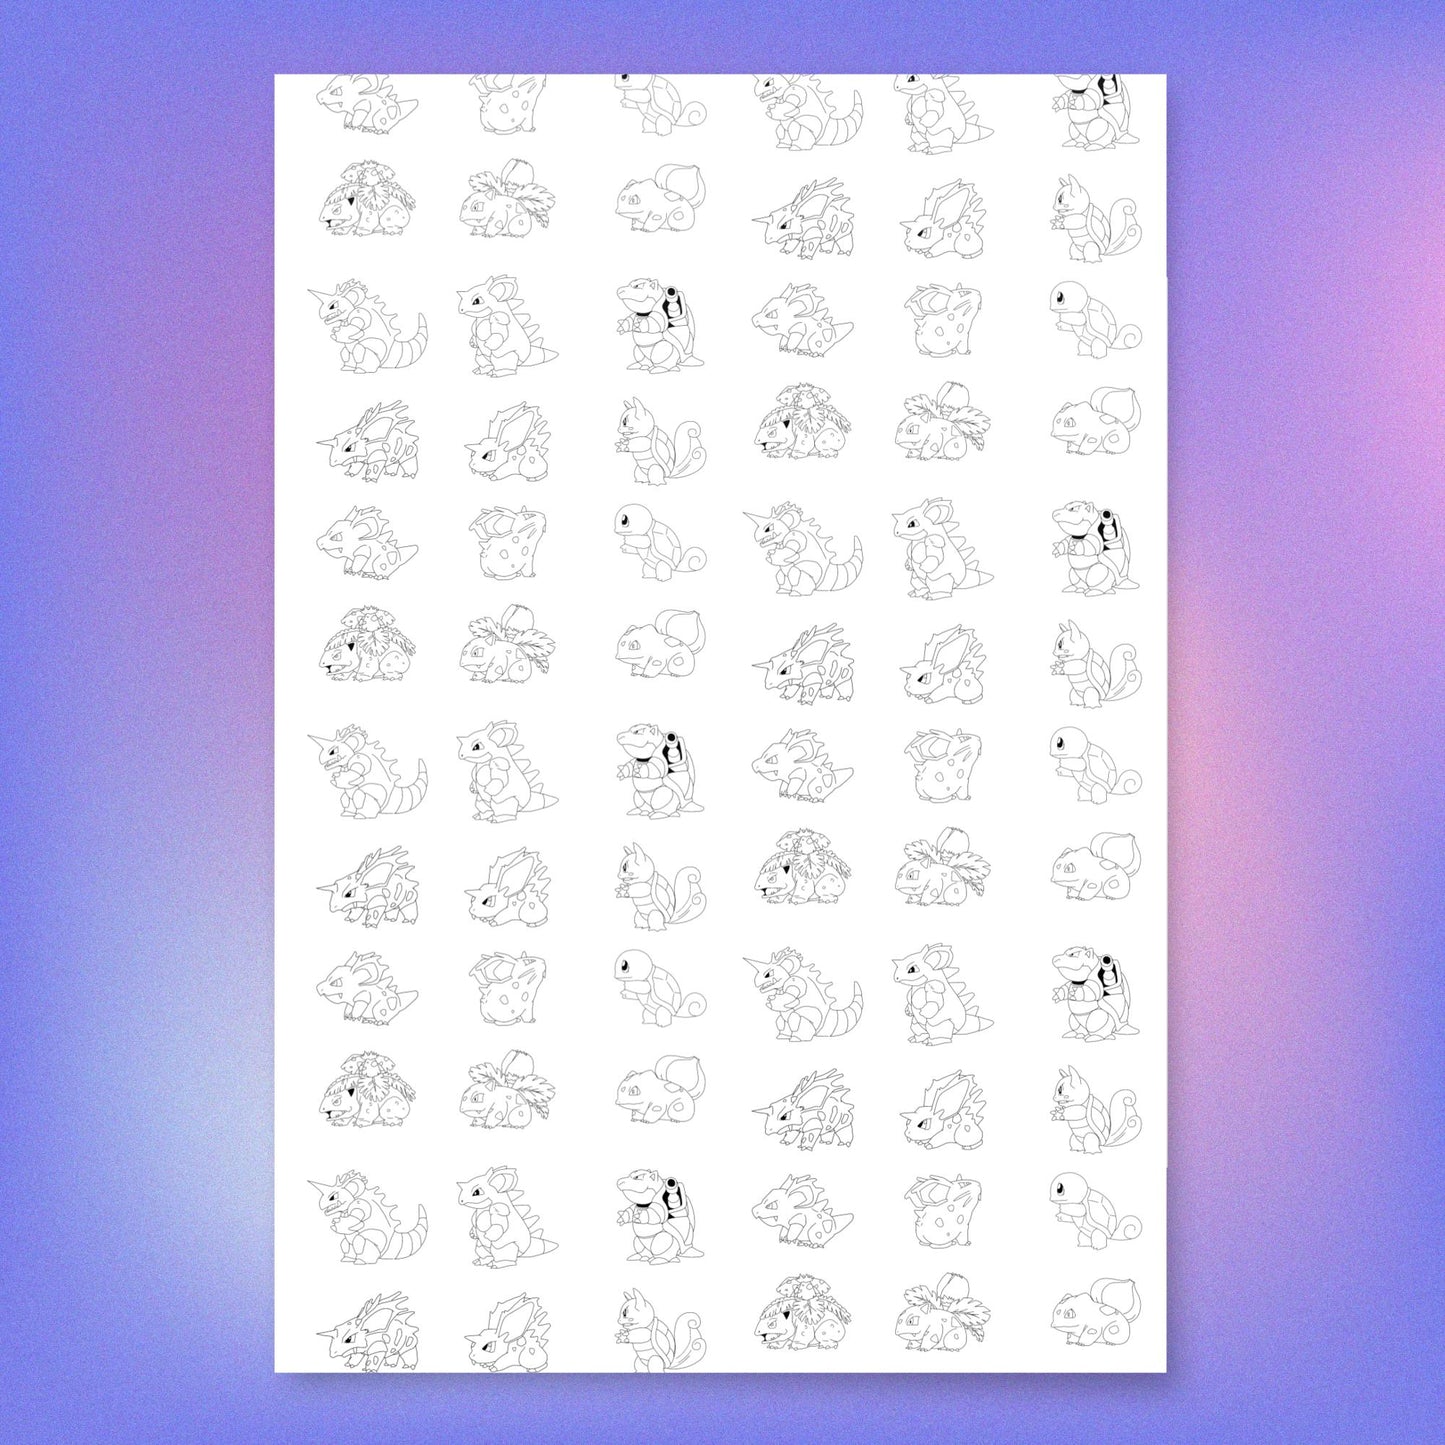 3 Pocket Monsters Wrapping paper sheets